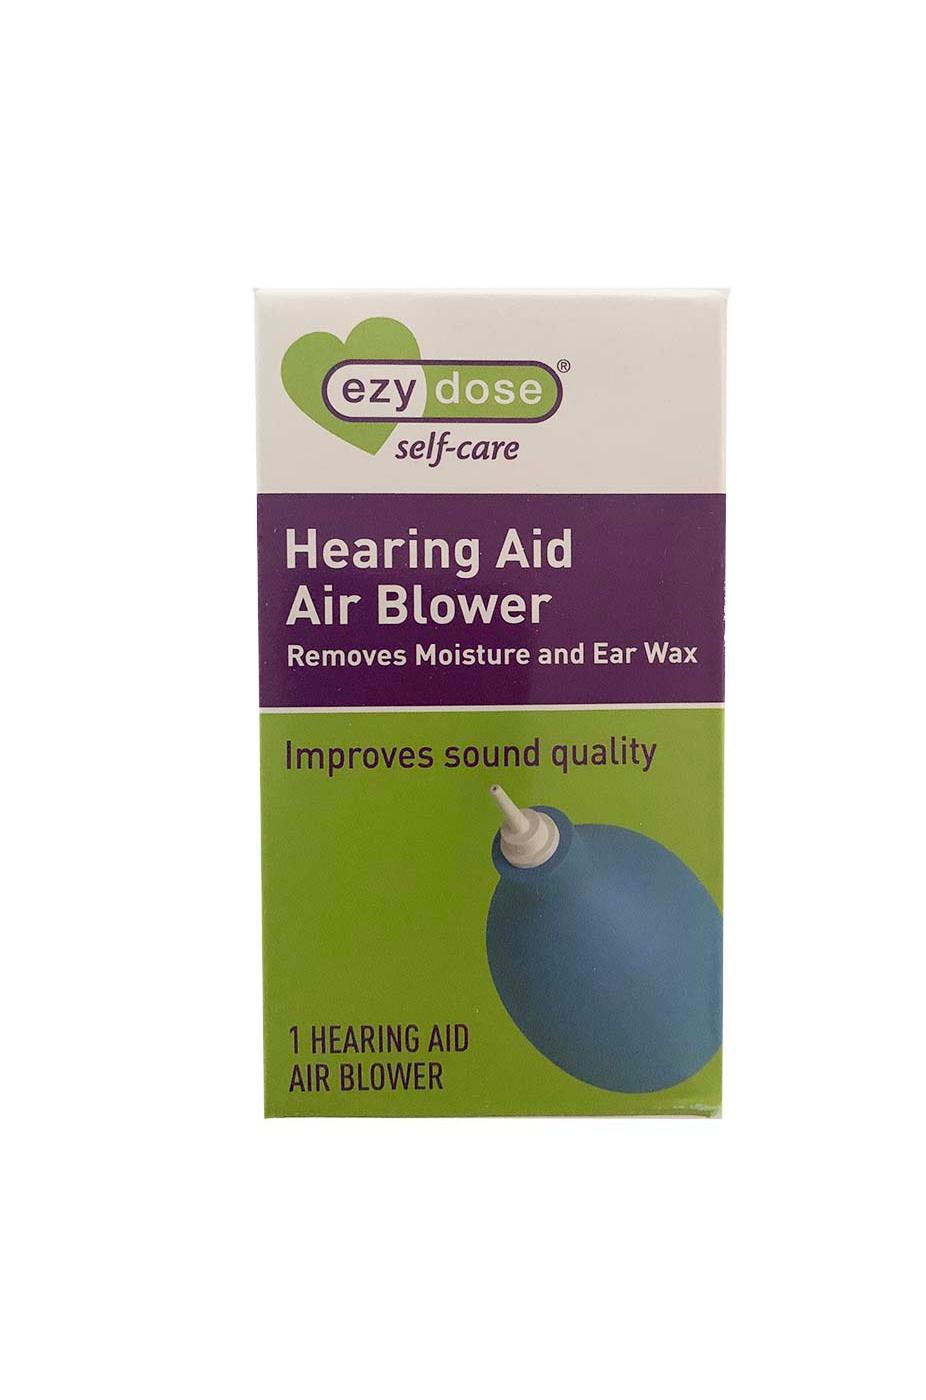 Ezy Dose Hearing Aid Air Blower; image 1 of 2